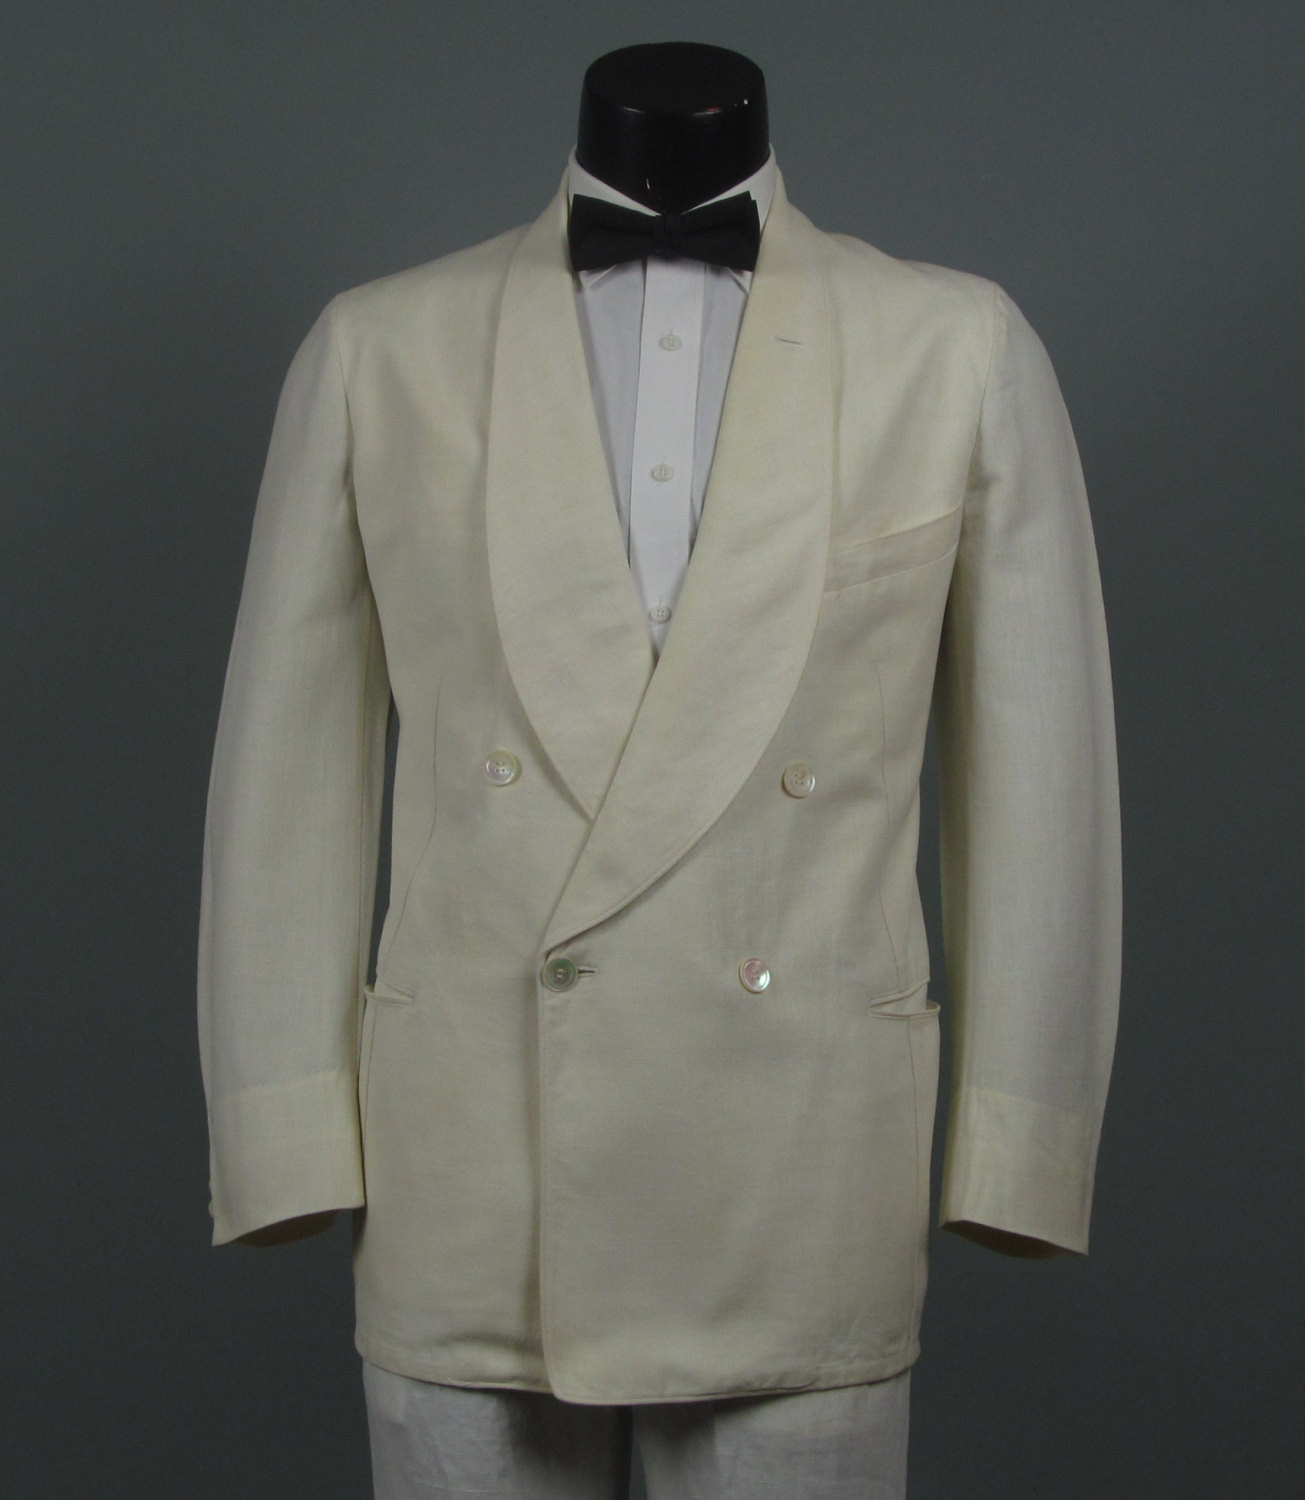 Mens Dinner Jacket
 Vintage Mens Dinner Jacket 1930s Authentic ICONIC PALM BEACH